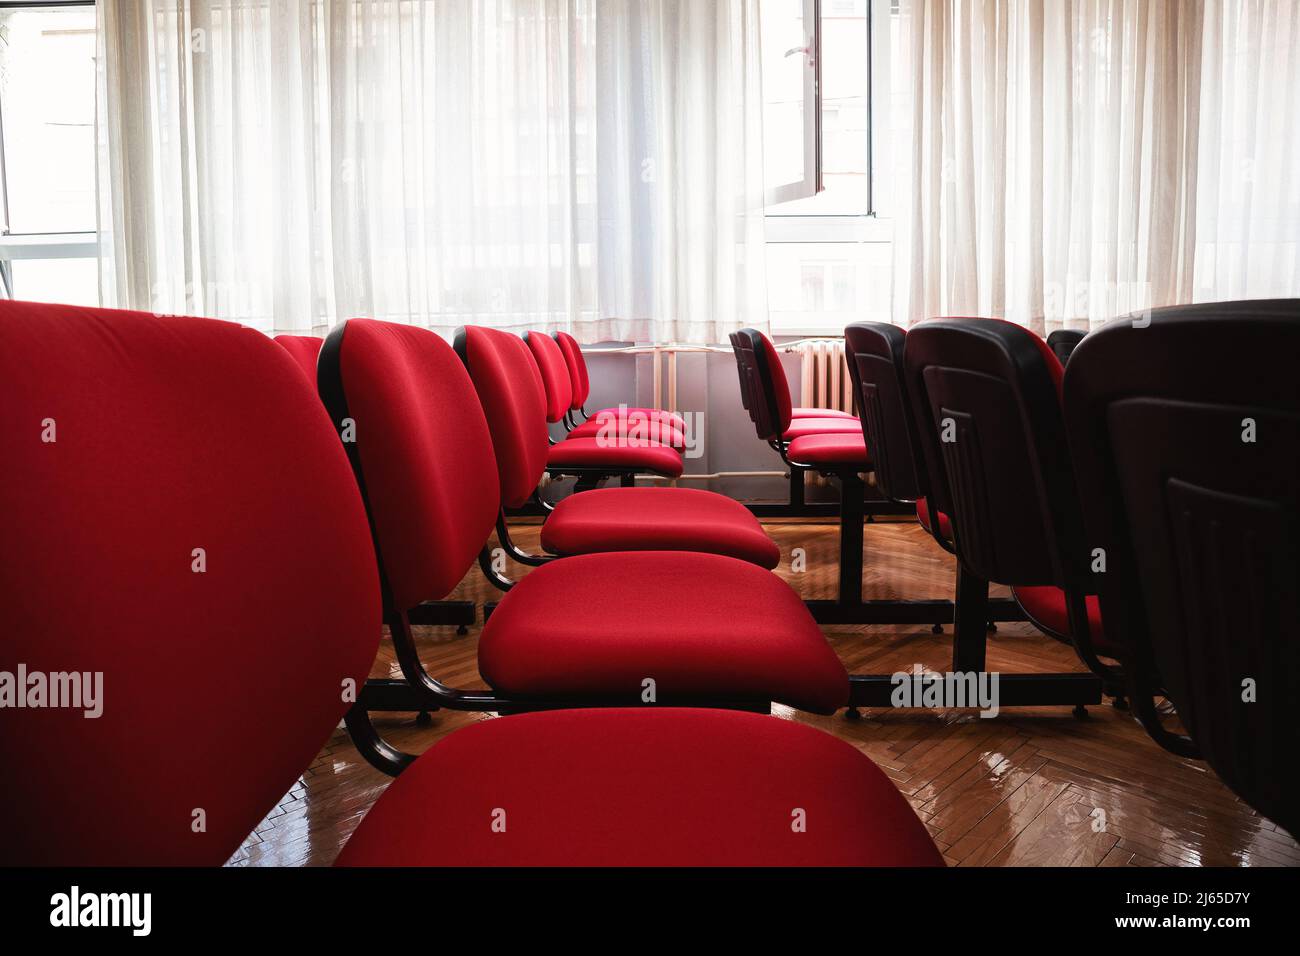 Interior of a classroom with red chairs. Stock Photo